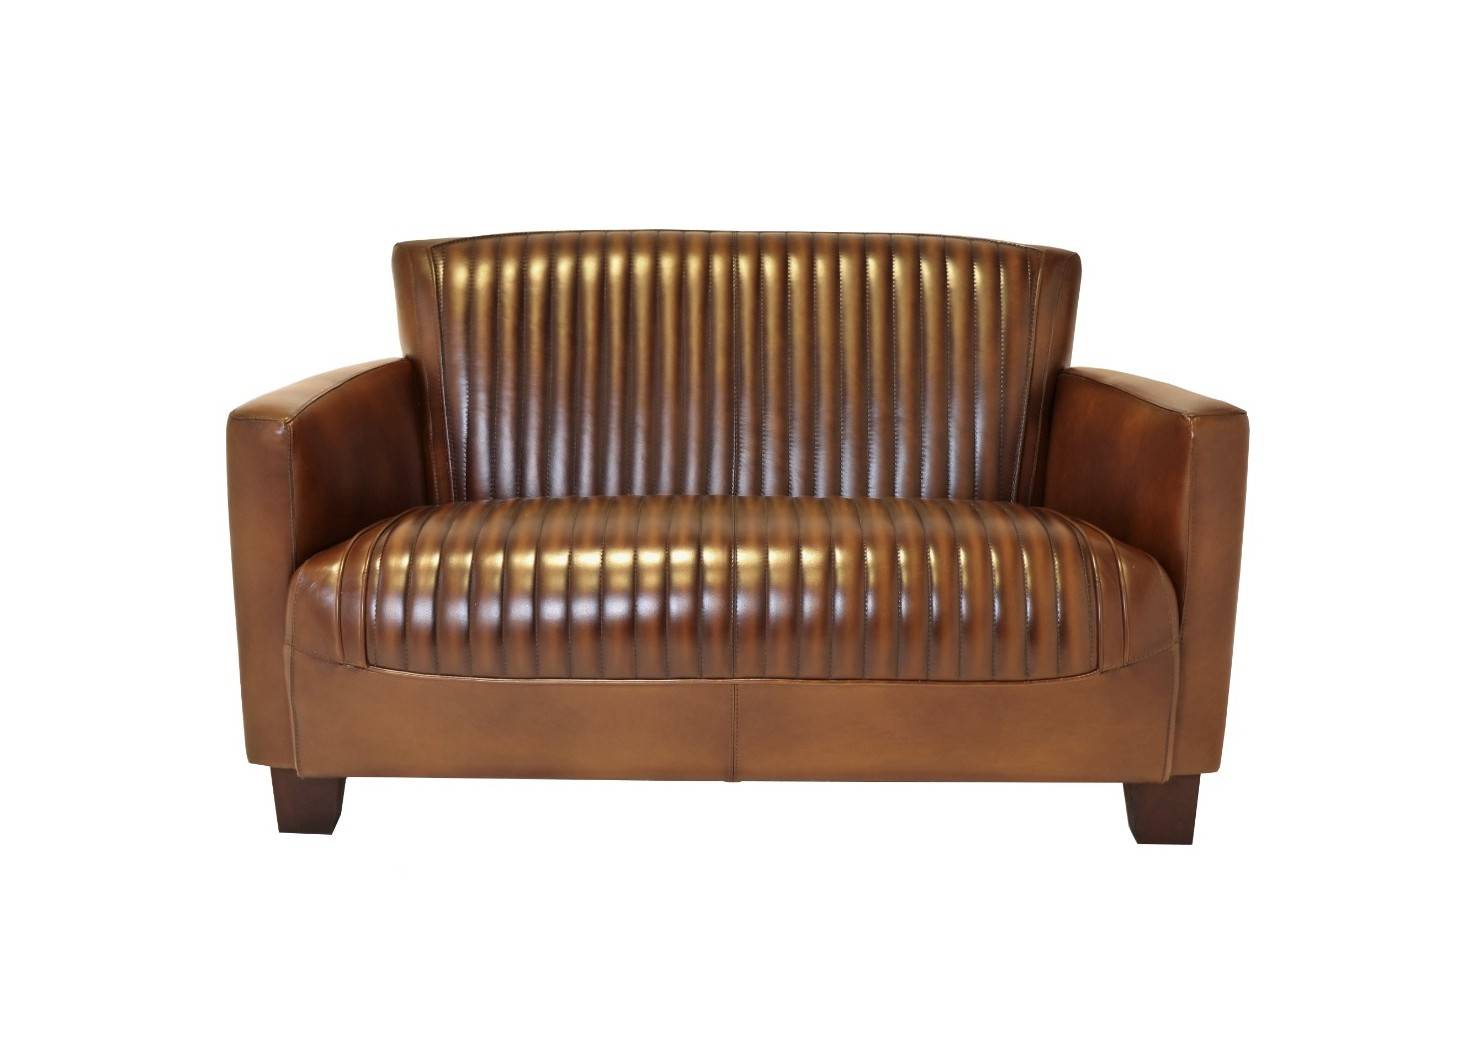 Nogent sofa club in brown leather